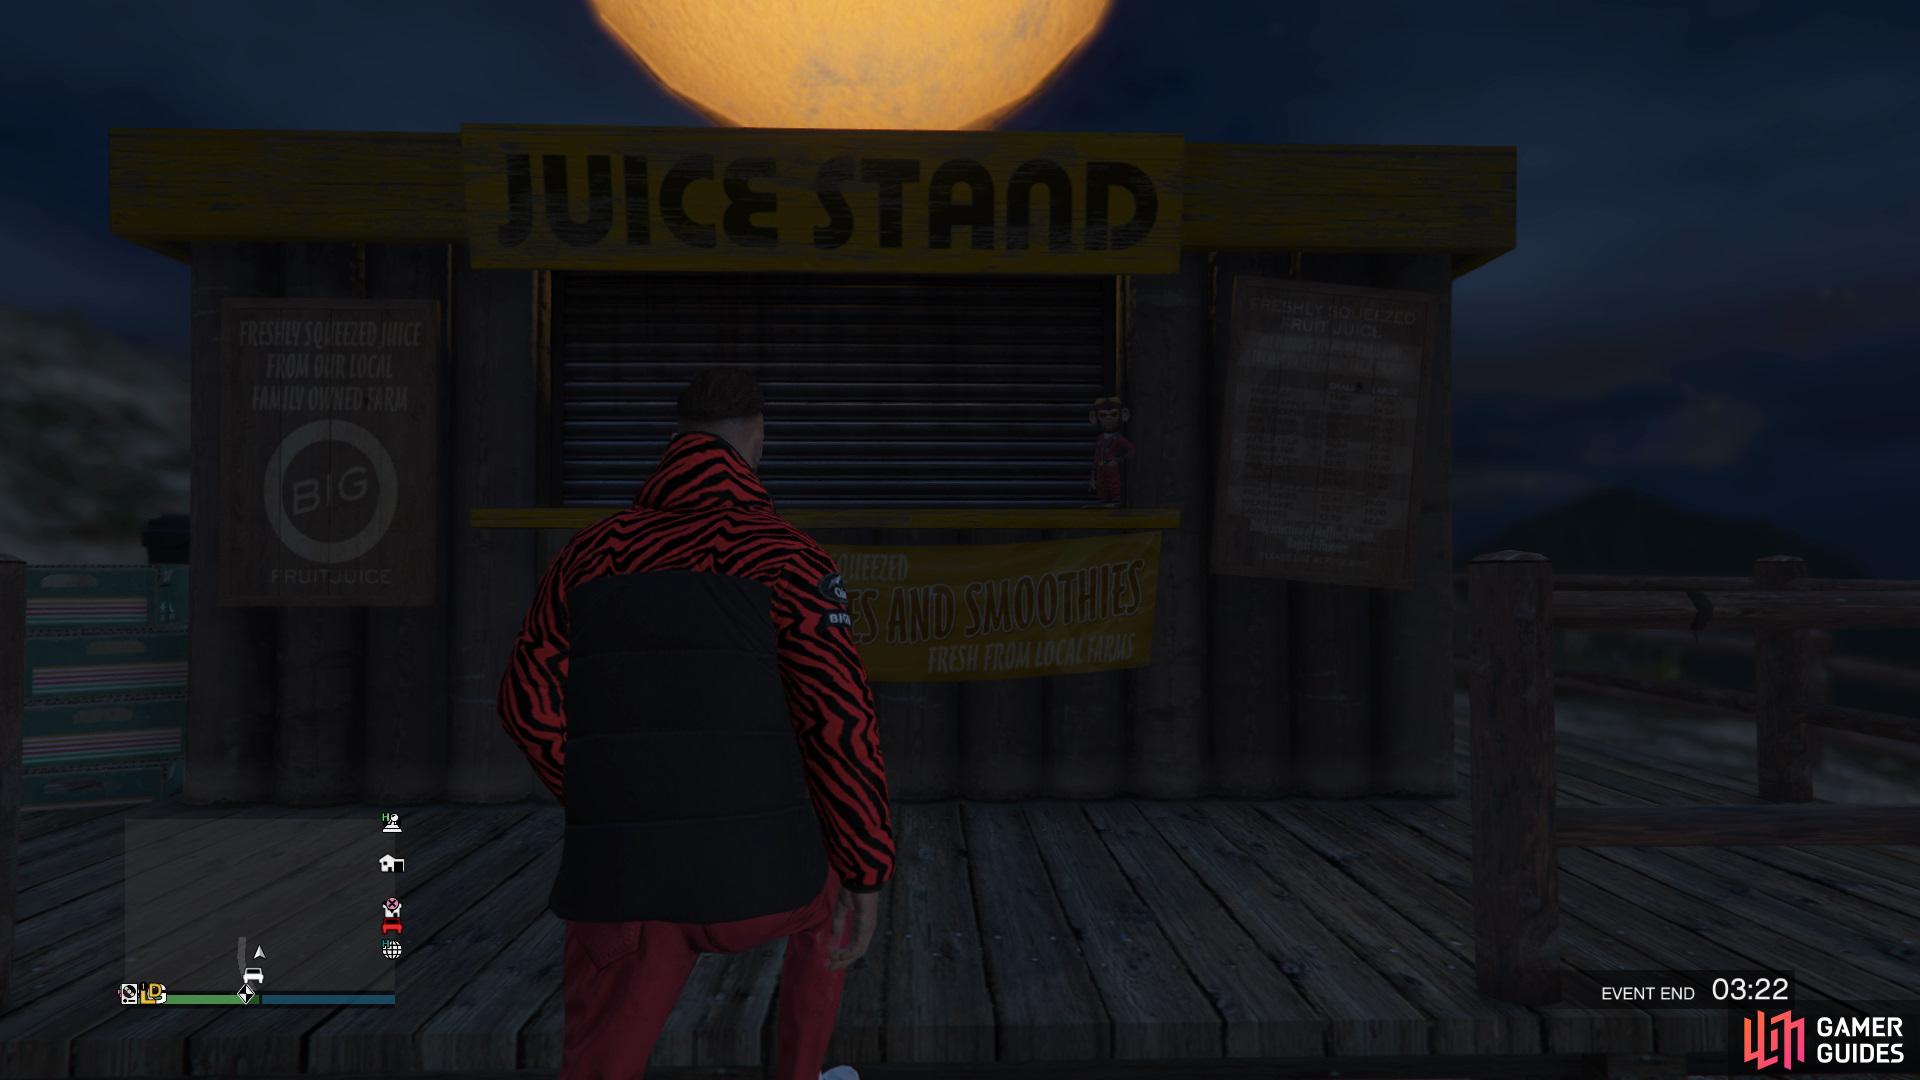 to find the action figure sitting in the juice stand